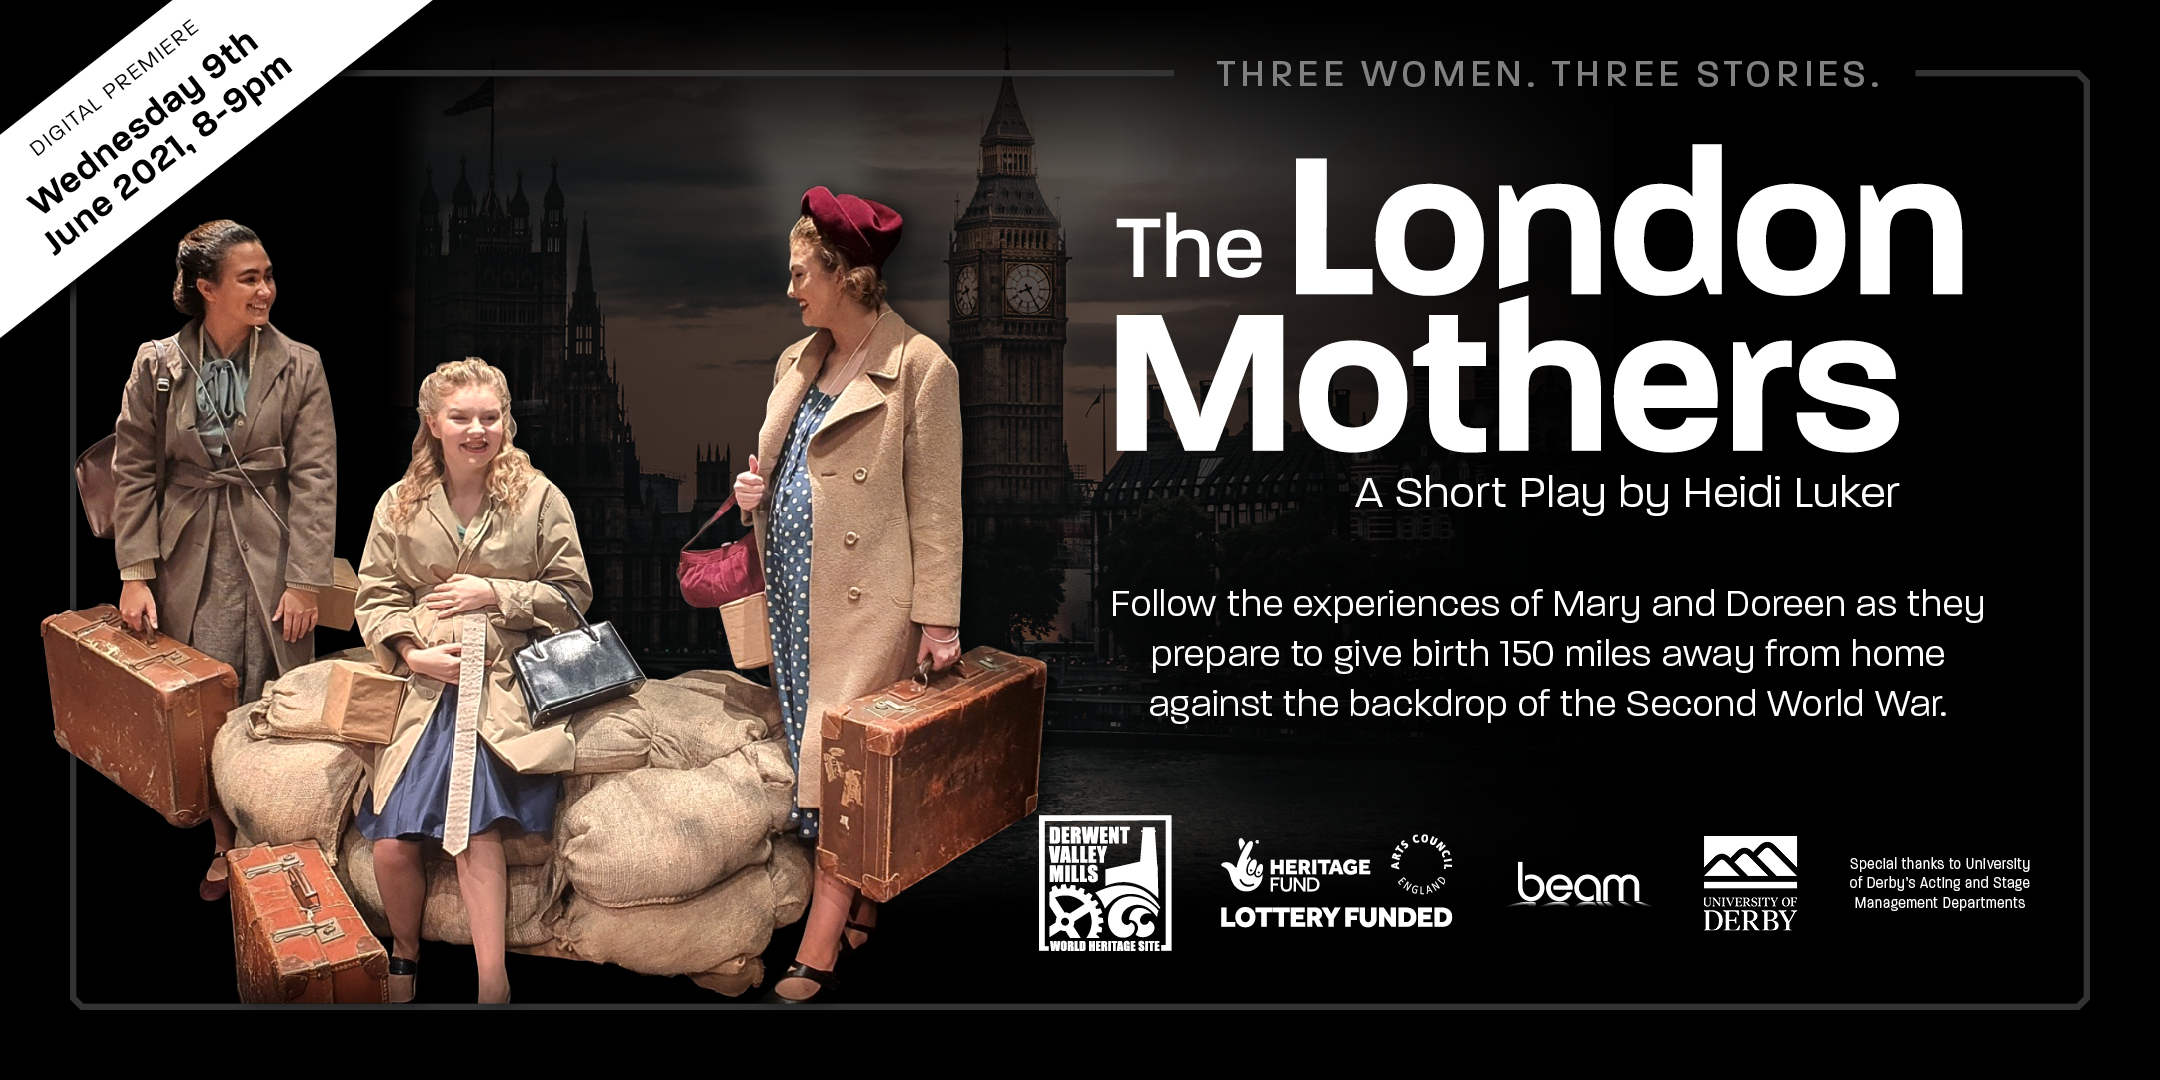 The London Mothers